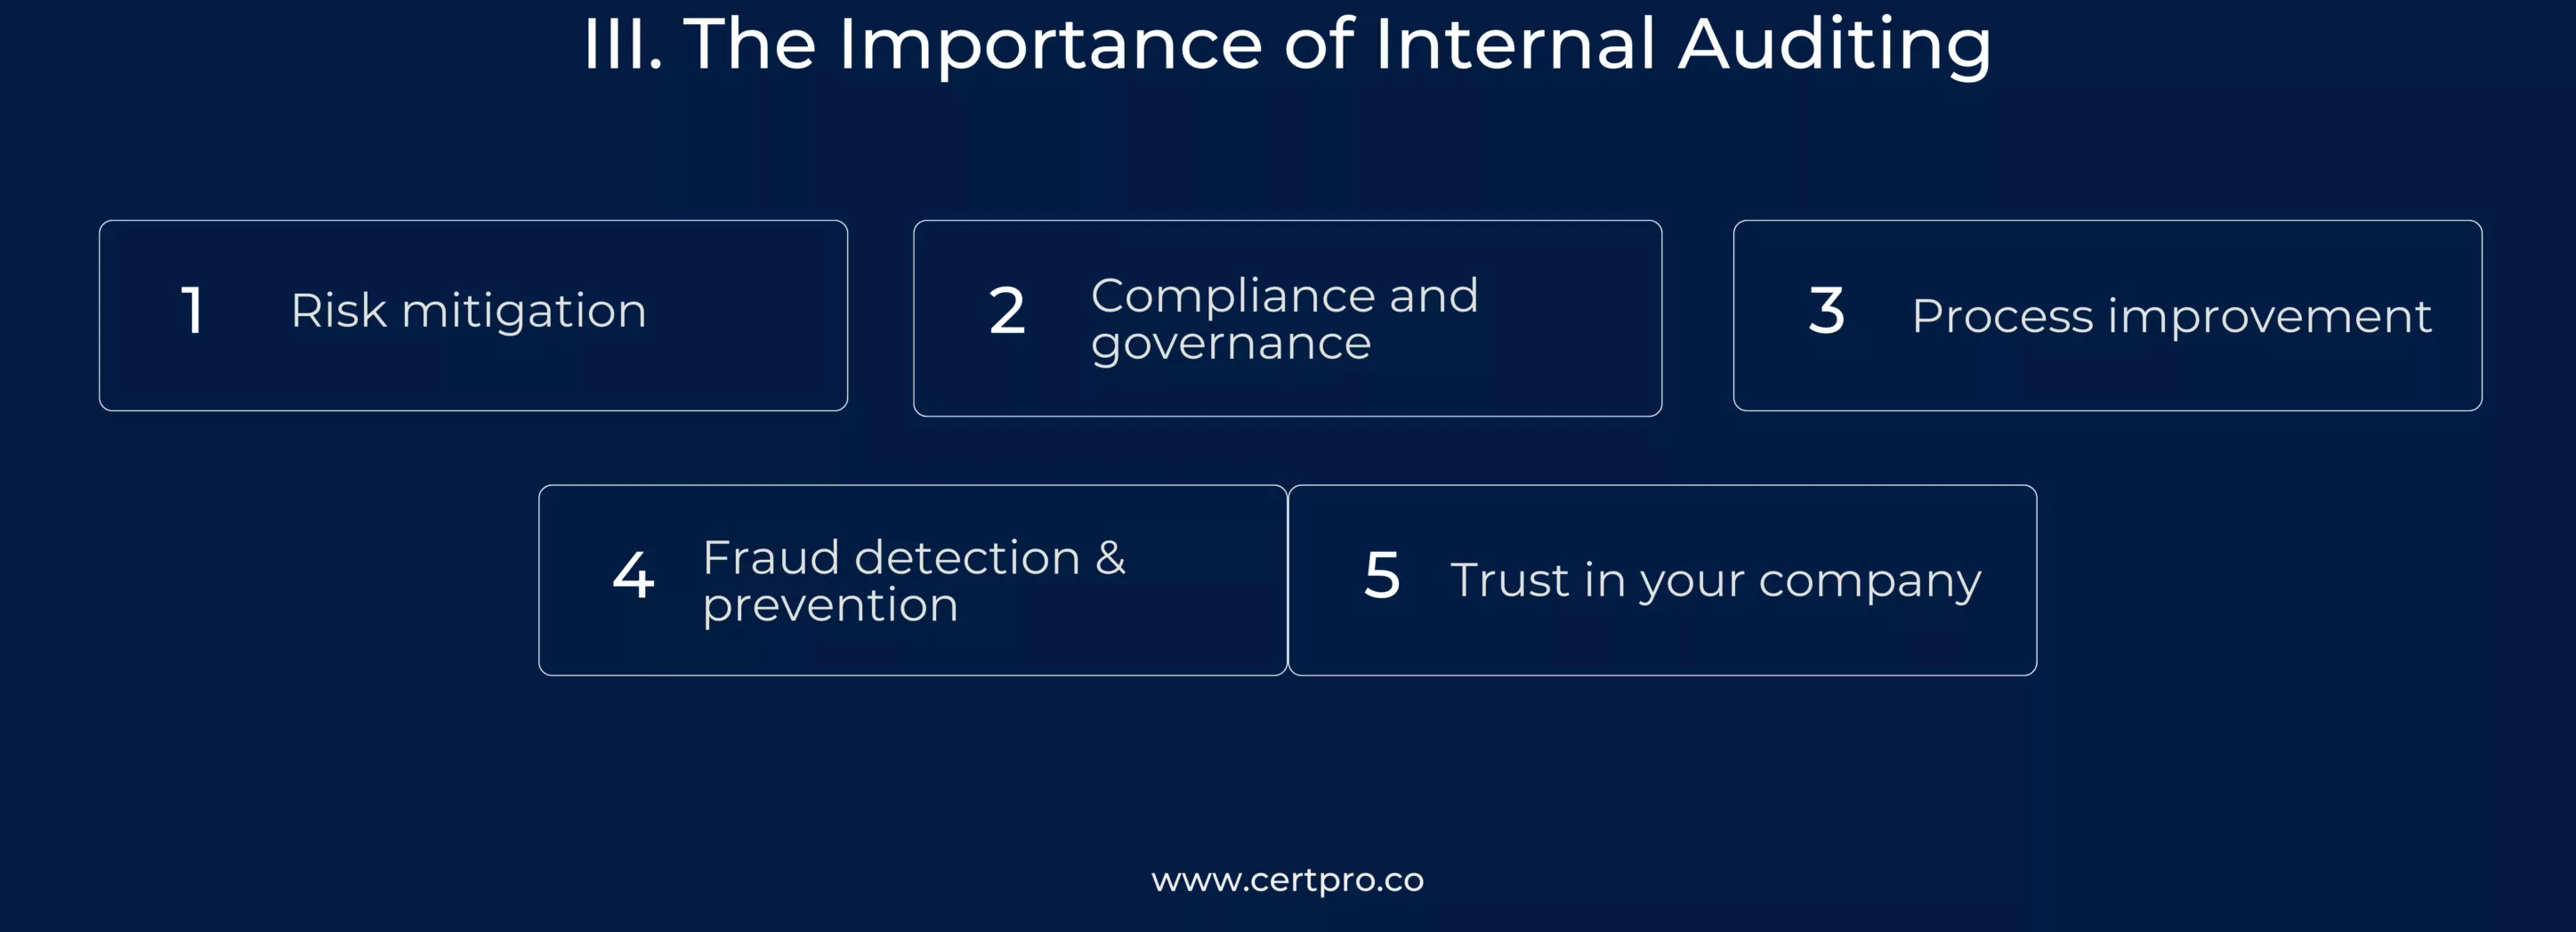 The Importance of Internal Auditing